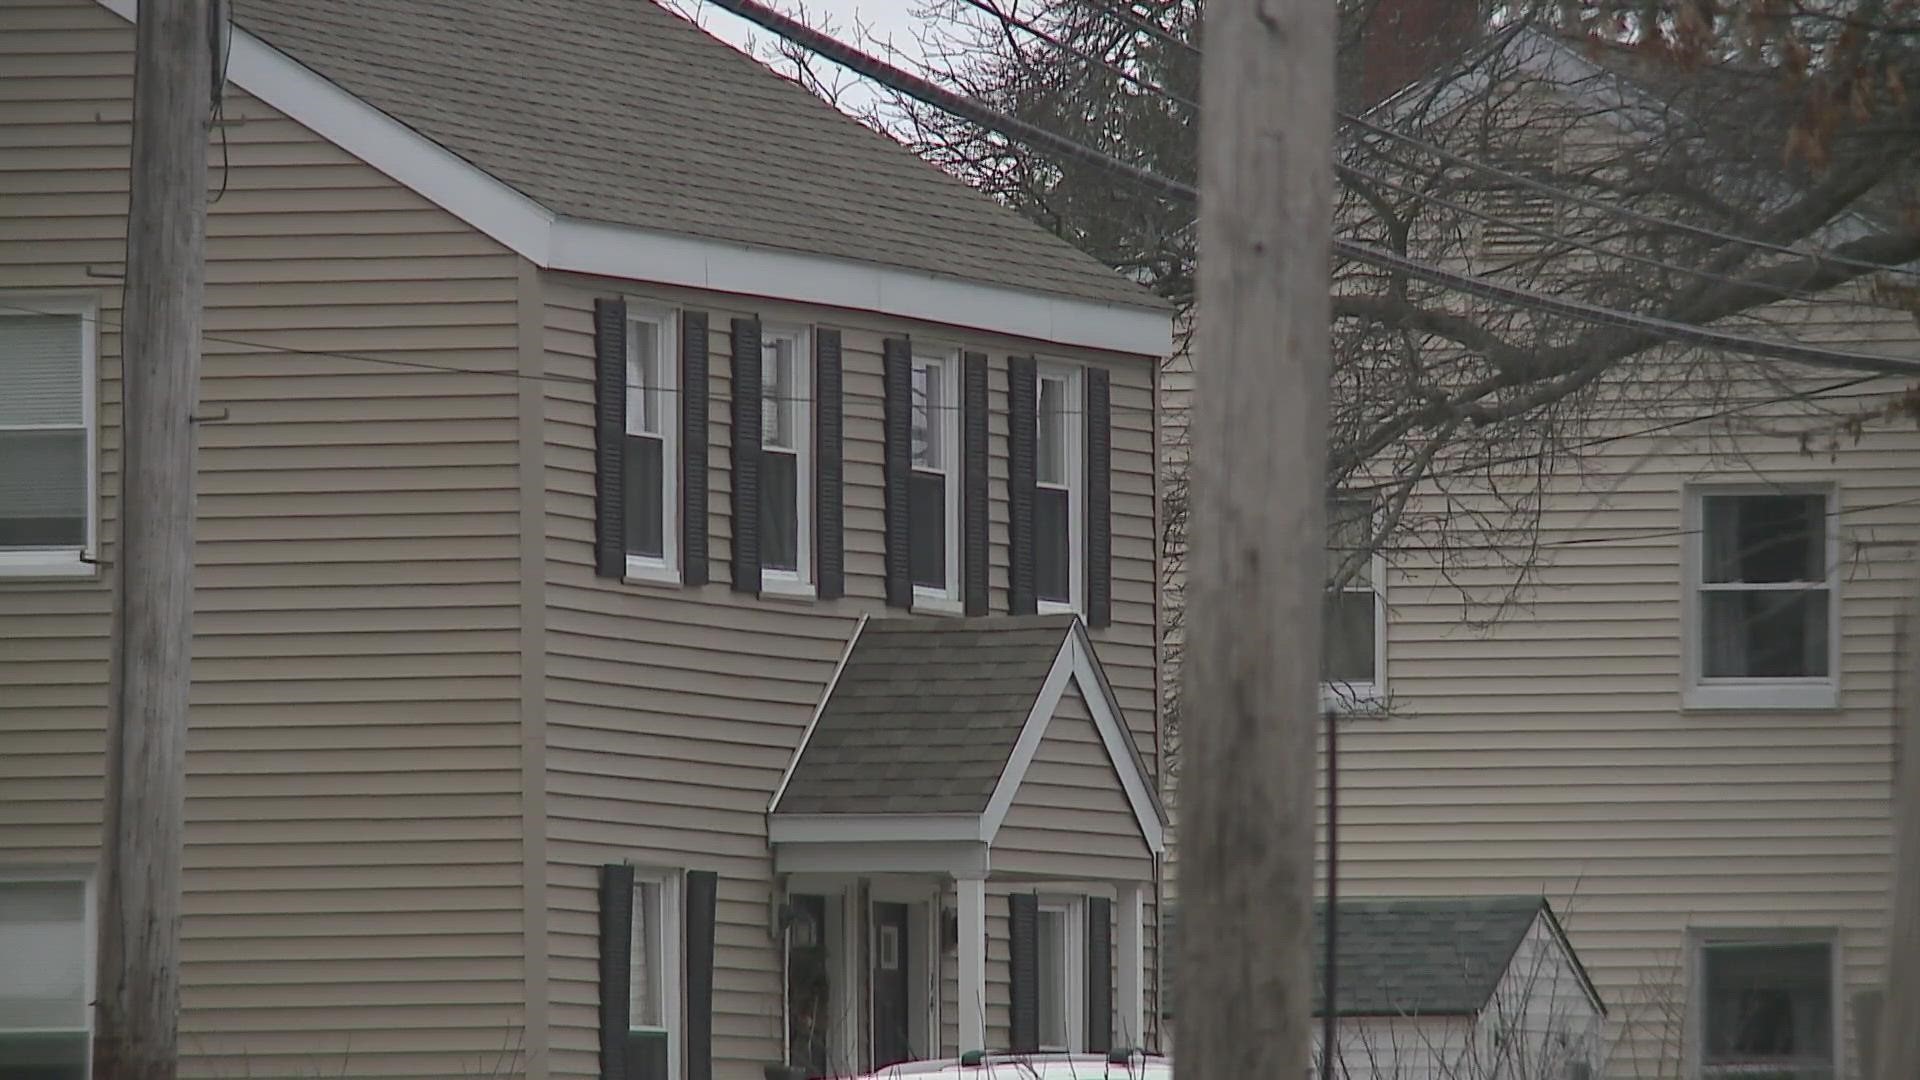 On Tuesday, March 7, the South Portland city council will hold a vote on a rent stabilization ordinance.